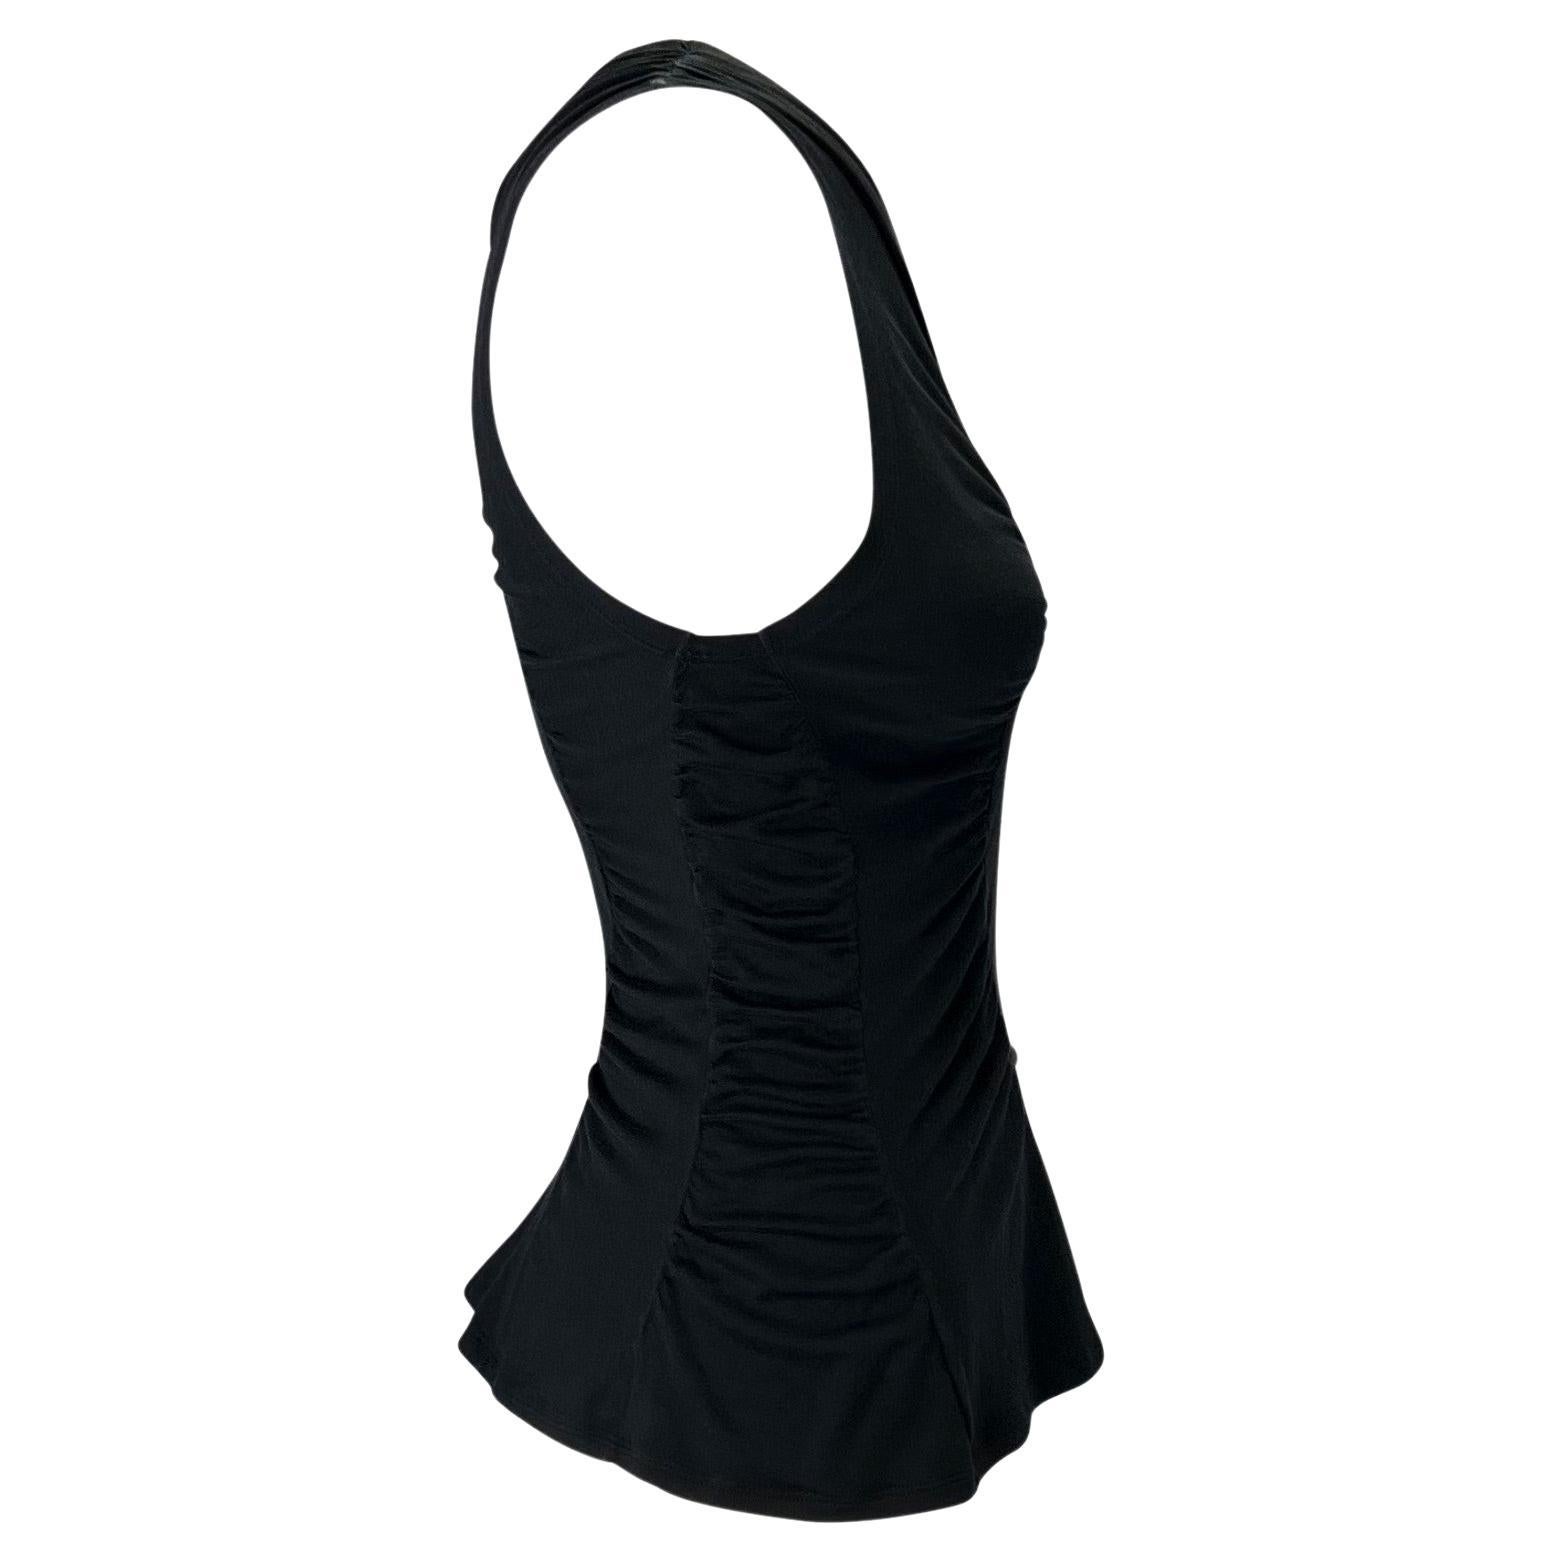 Women's S/S 2003 Yves Saint Laurent by Tom Ford Black Ruched Cotton Tank Top For Sale